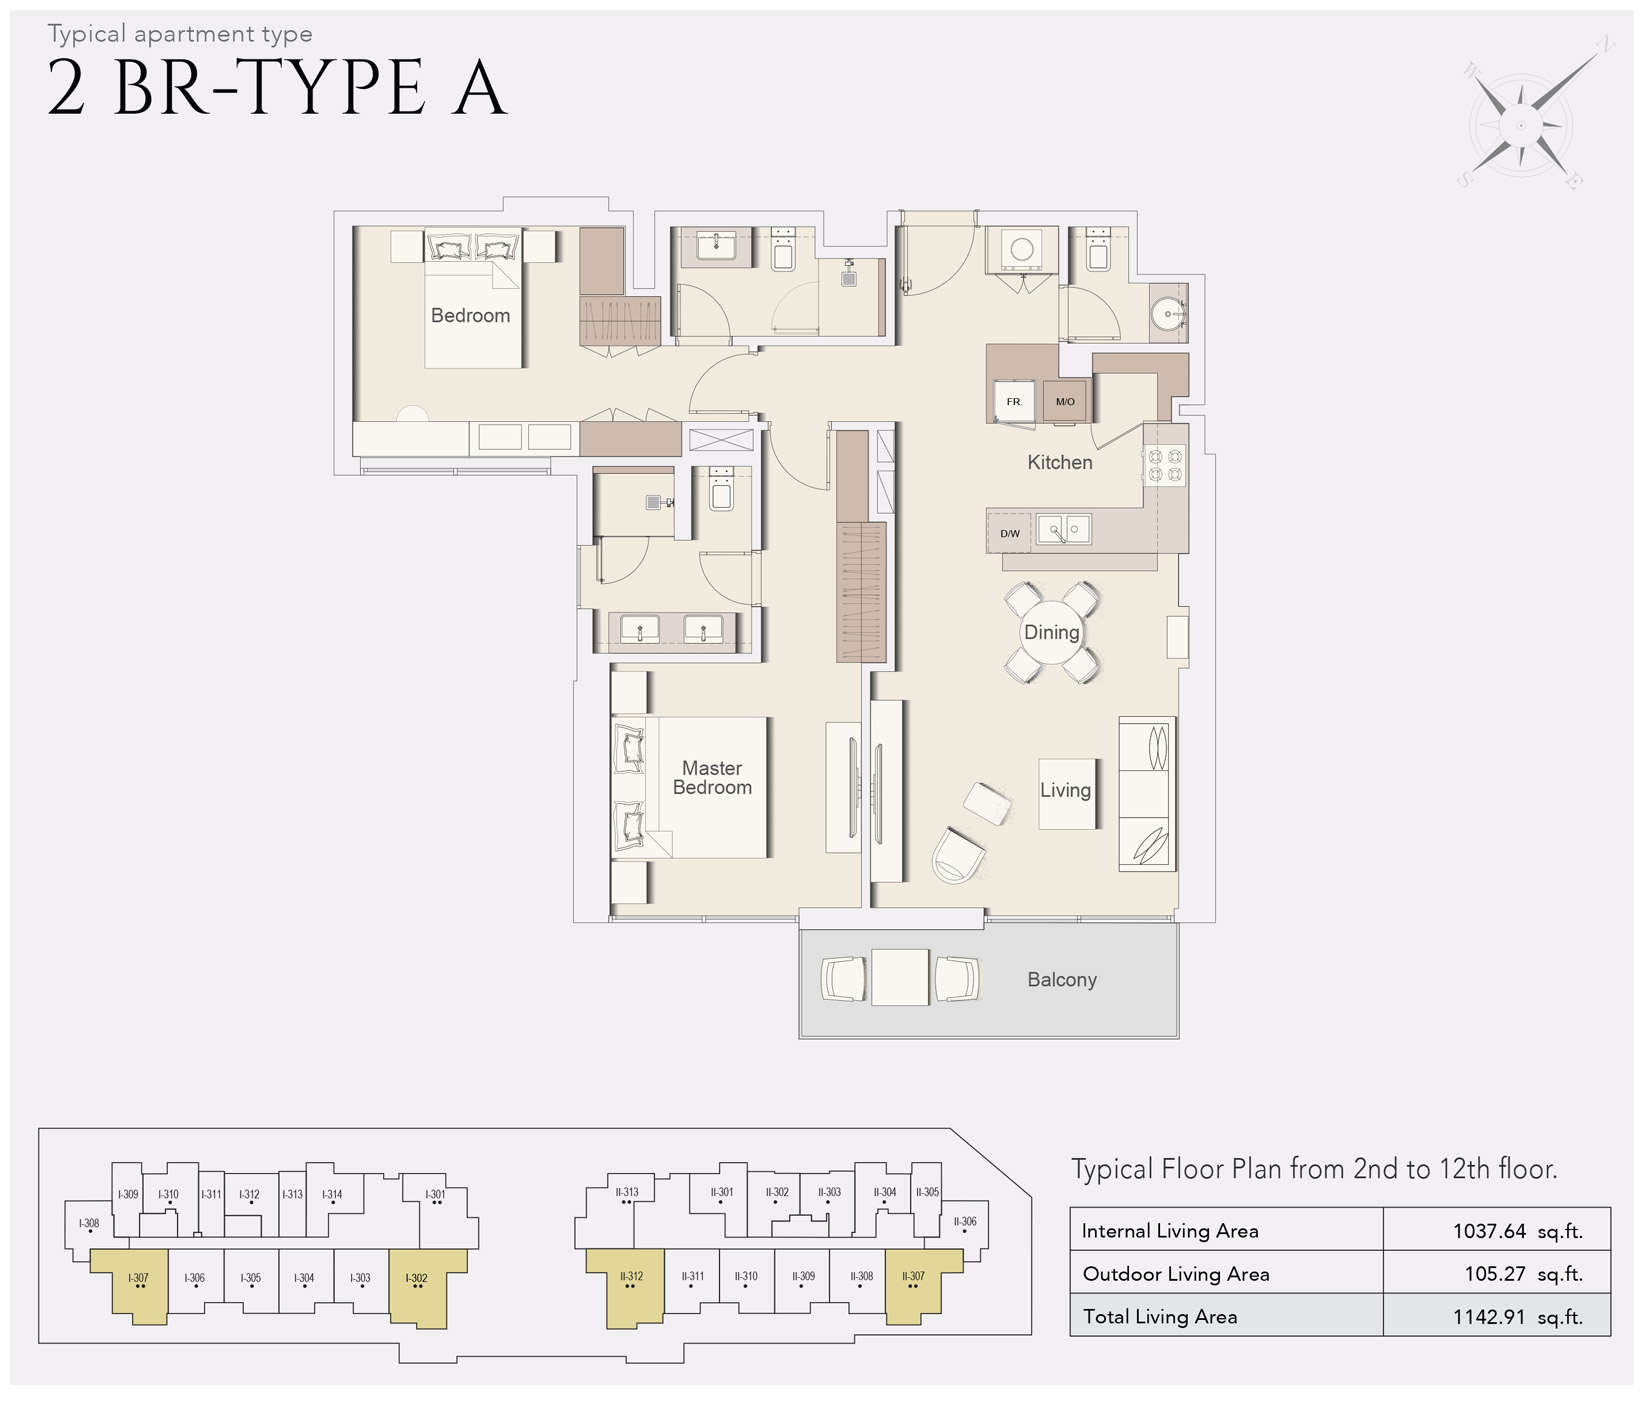 2 Bedroom Type A, Size 1142 Sq Ft